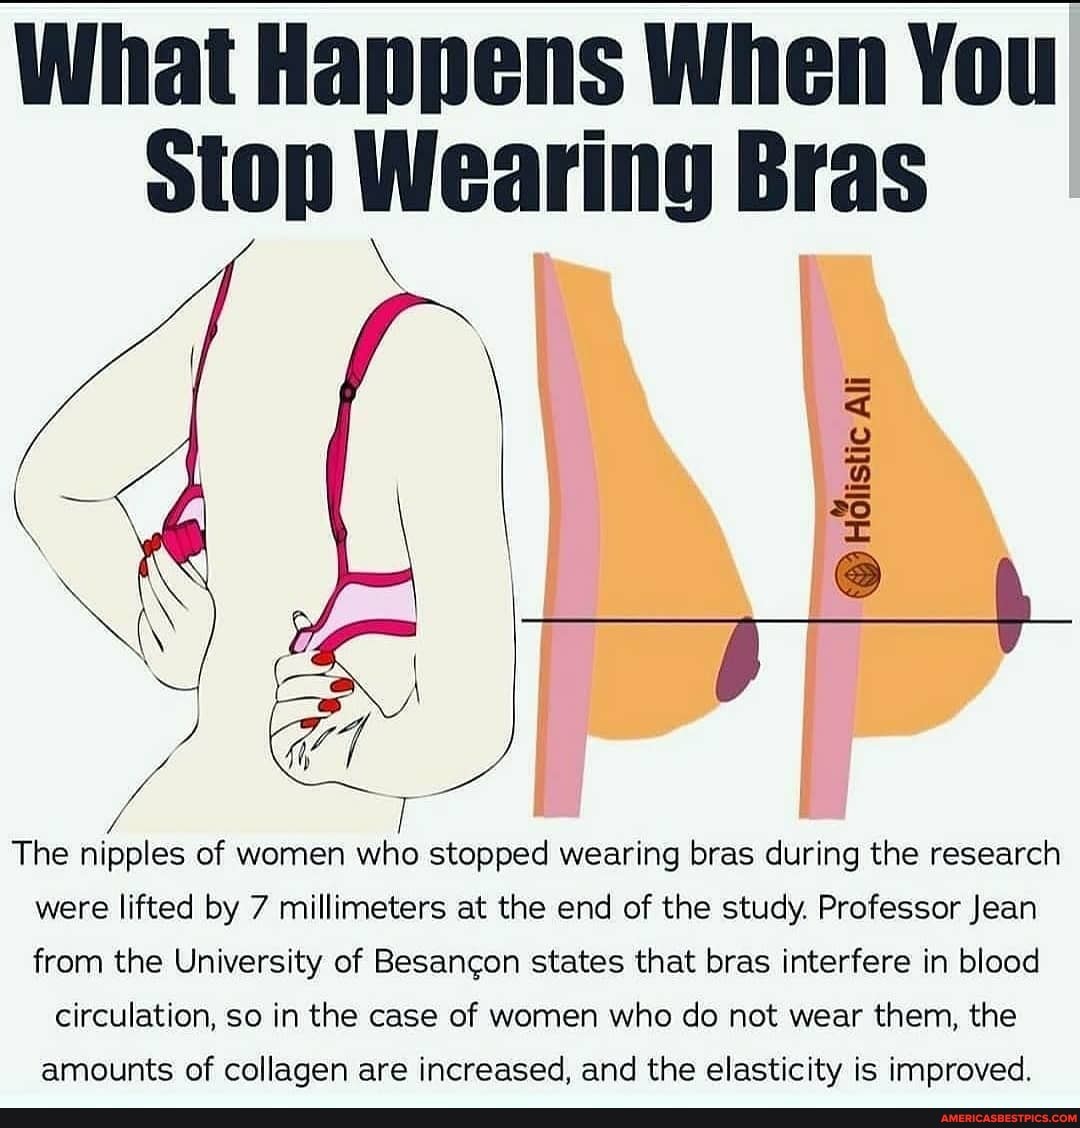 What Happens When You Siop Wearing Bras The nipples of women stopped wearin...